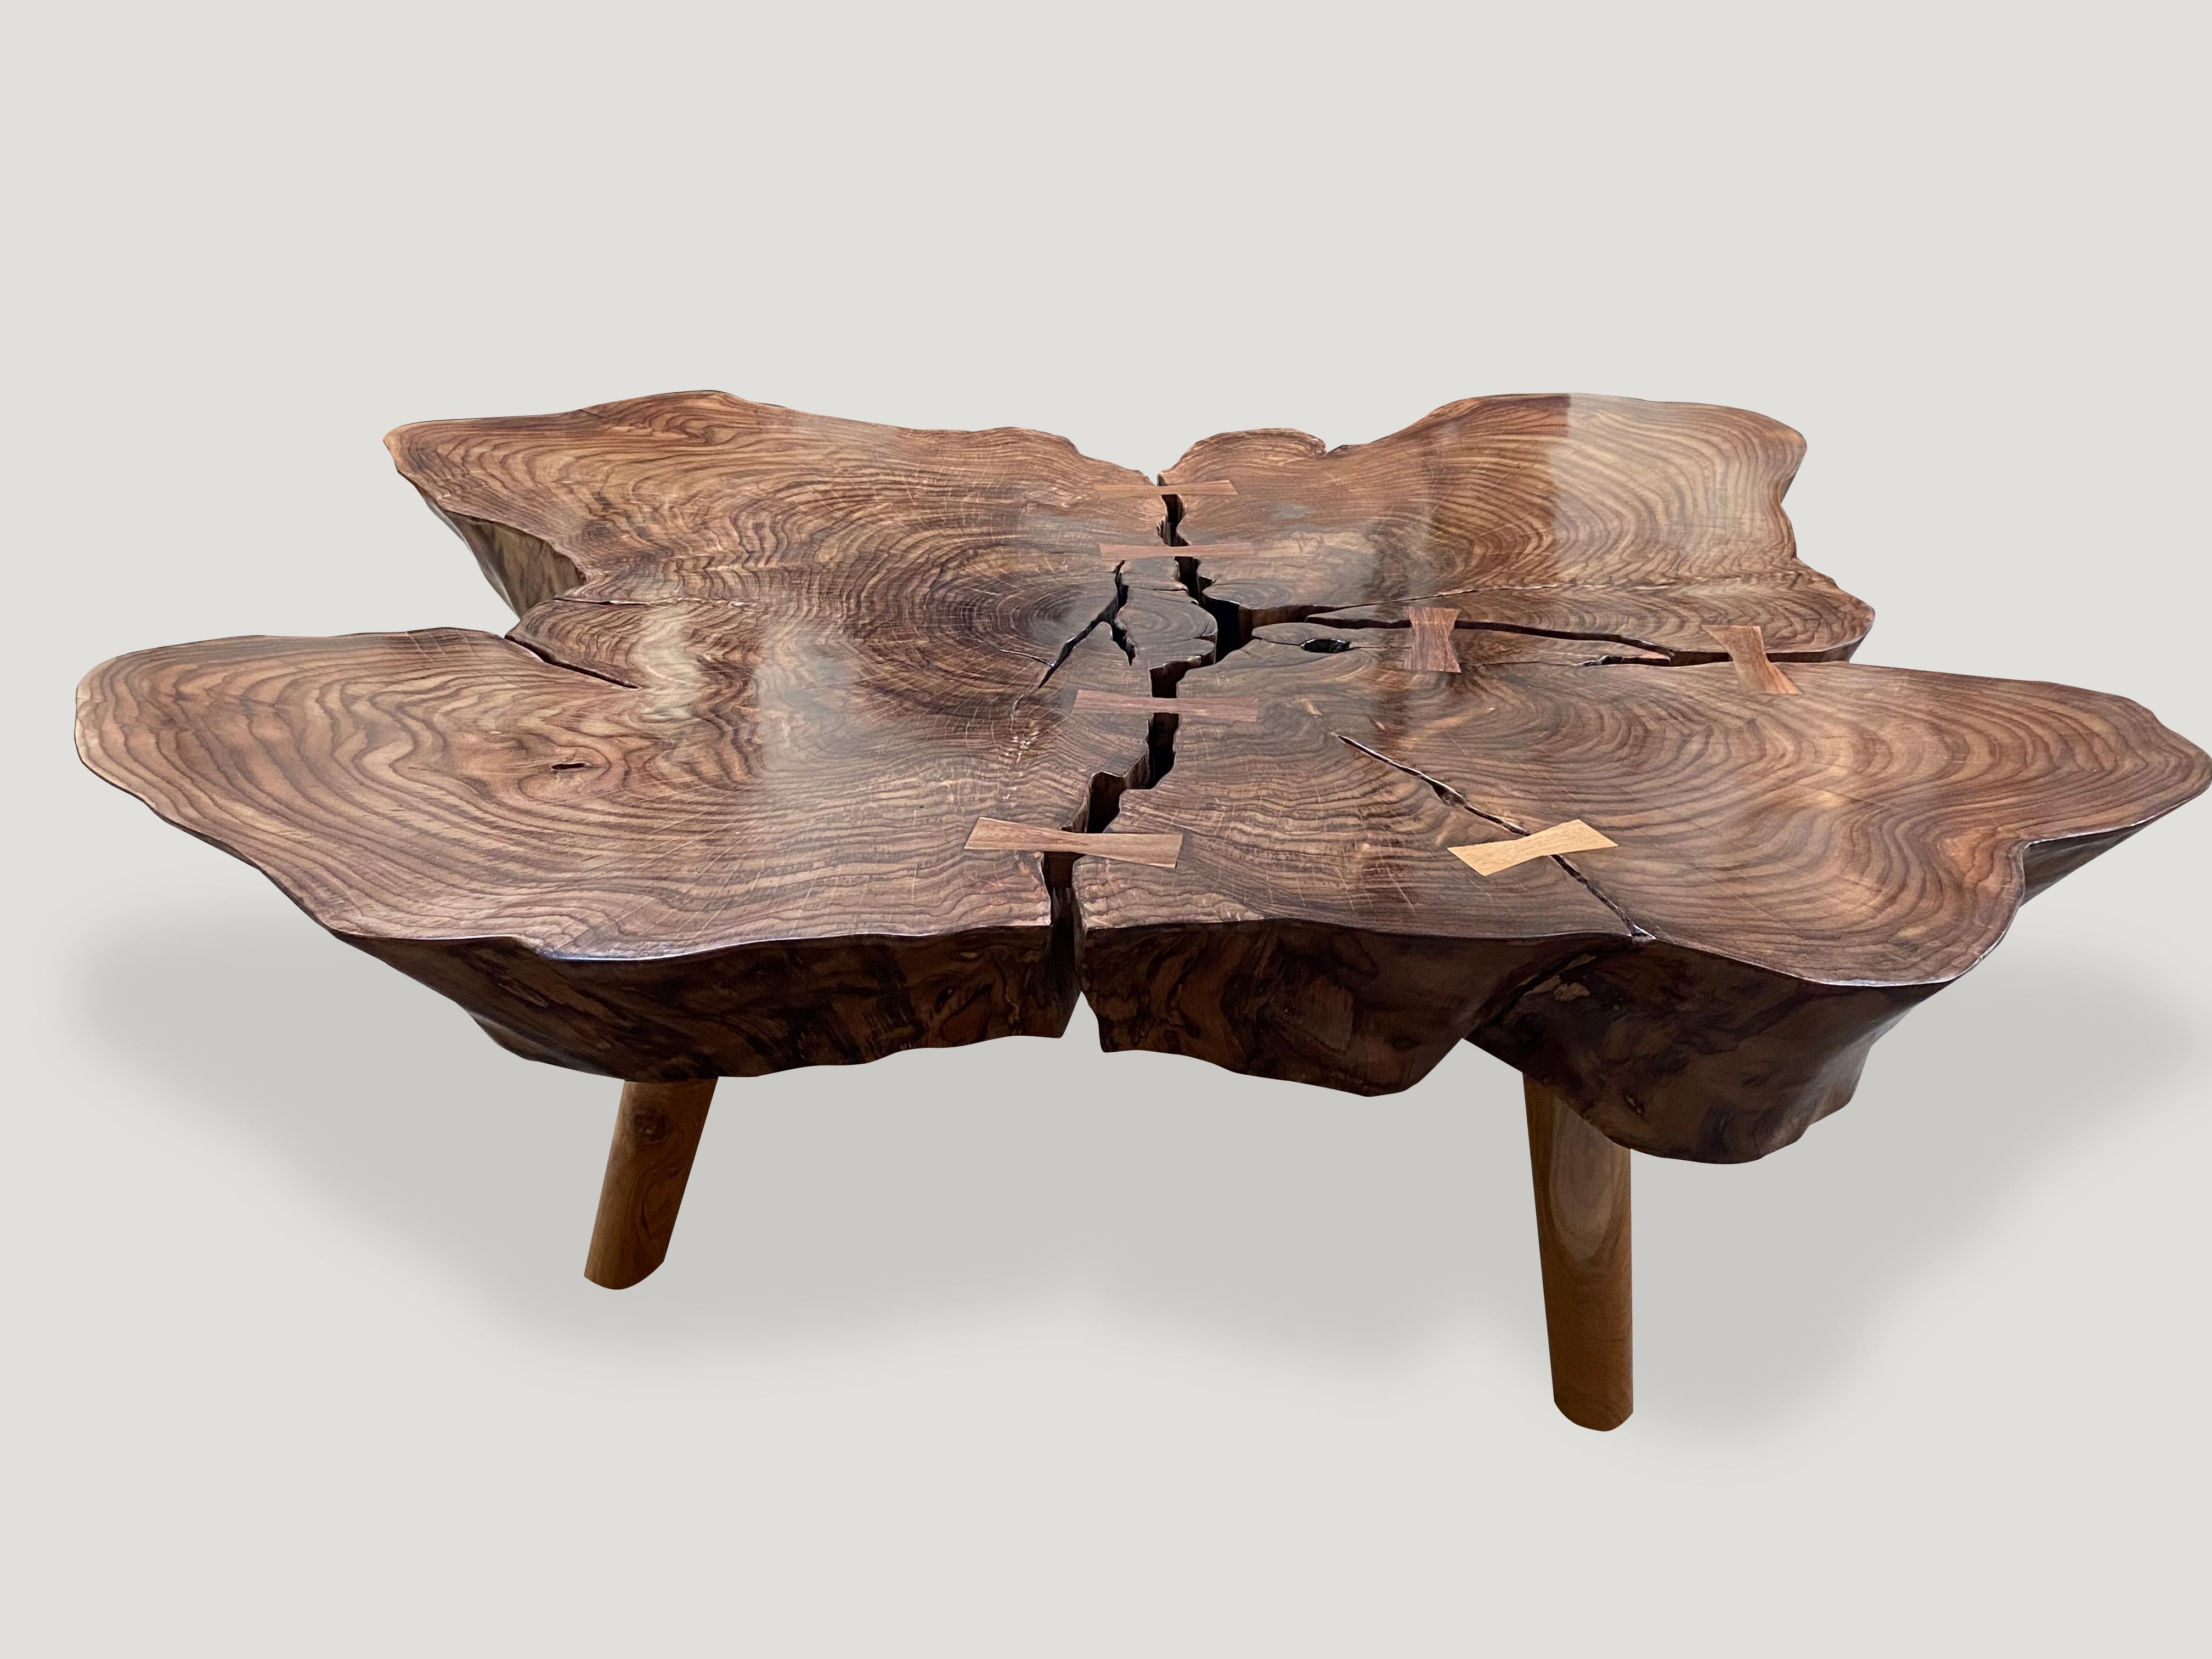 Impressive reclaimed rosewood coffee table. We polished the top with a natural oil to bring out the stunning wood grain on this butterfly shaped top. Floating on teak mid century style legs. Organic with a twist. Own an Andrianna Shamaris